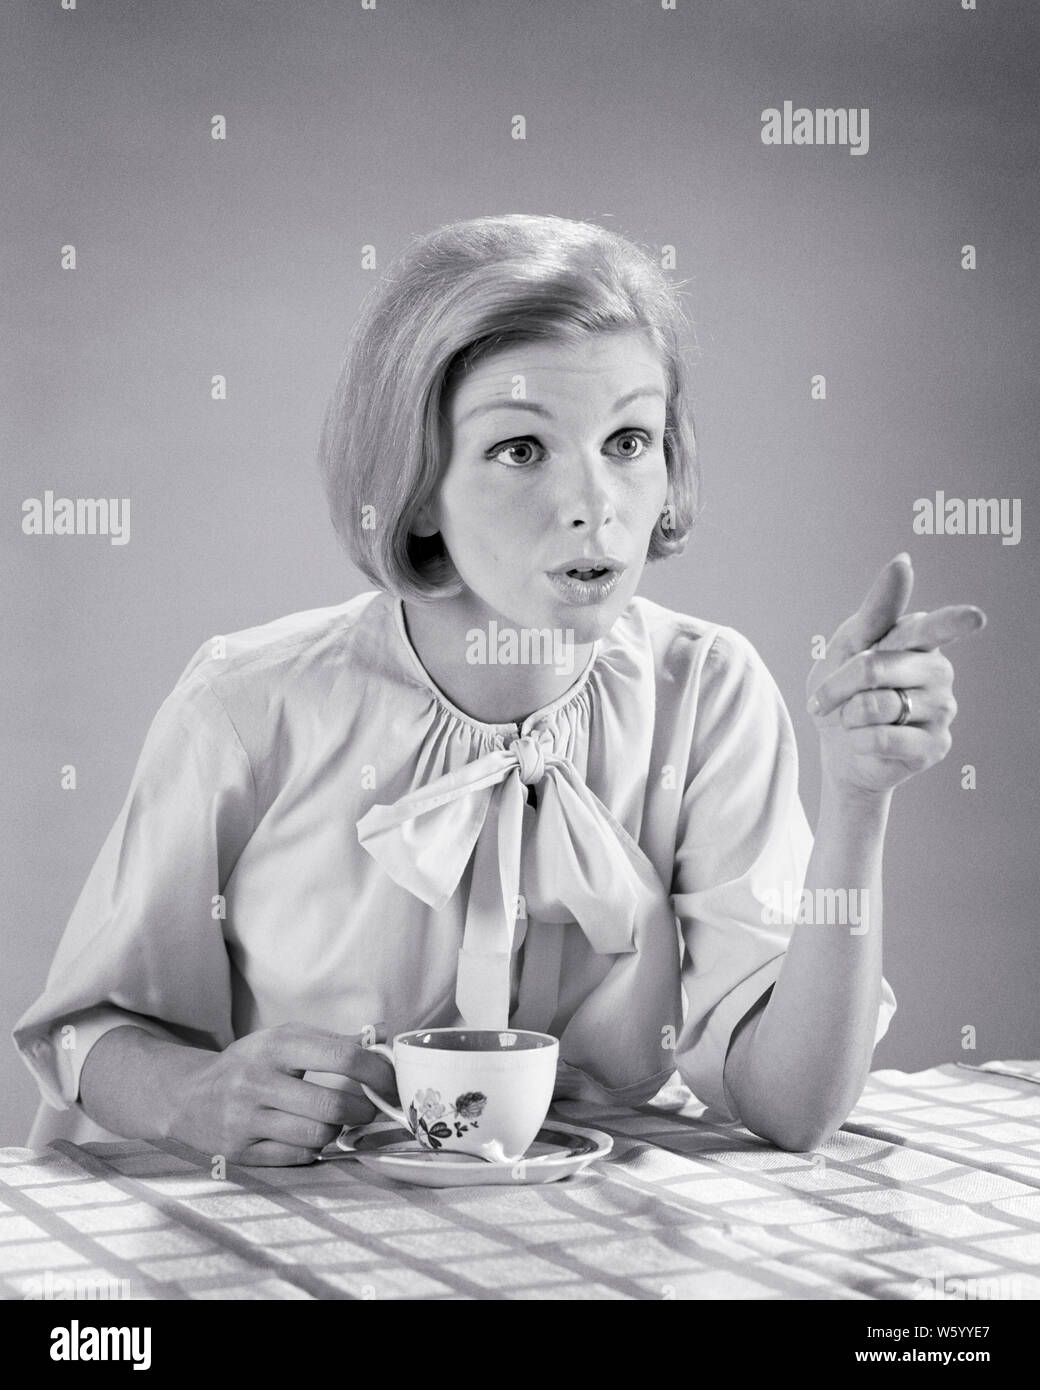 1960s BLONDE WOMAN DRINKING HER MORNING COFFEE TALKING ASSERTIVELY ACROSS BREAKFAST TABLE GESTURING POINTING HER FINGER - s15466 HAR001 HARS FACIAL ANGER COMMUNICATION BLOND YOUNG ADULT LIFESTYLE FEMALES STUDIO SHOT HOME LIFE COPY SPACE HALF-LENGTH LADIES PERSONS AFRAID FRIGHTENED CONFIDENCE GESTURING EXPRESSIONS TROUBLED AMAZED B&W MORNING HOMEMAKER BUG-EYED HOMEMAKERS DISAGREEMENT POWERFUL AUTHORITY DISAGREE GESTURES HOUSEWIVES CONCEPTUAL ACROSS FEARFUL SPAT EMPHATIC FEISTY WIDE-EYED BOLD INSISTENT QUARREL SQUABBLE STARTLED YOUNG ADULT WOMAN ALARMED BLACK AND WHITE CAUCASIAN ETHNICITY HAR001 Stock Photo